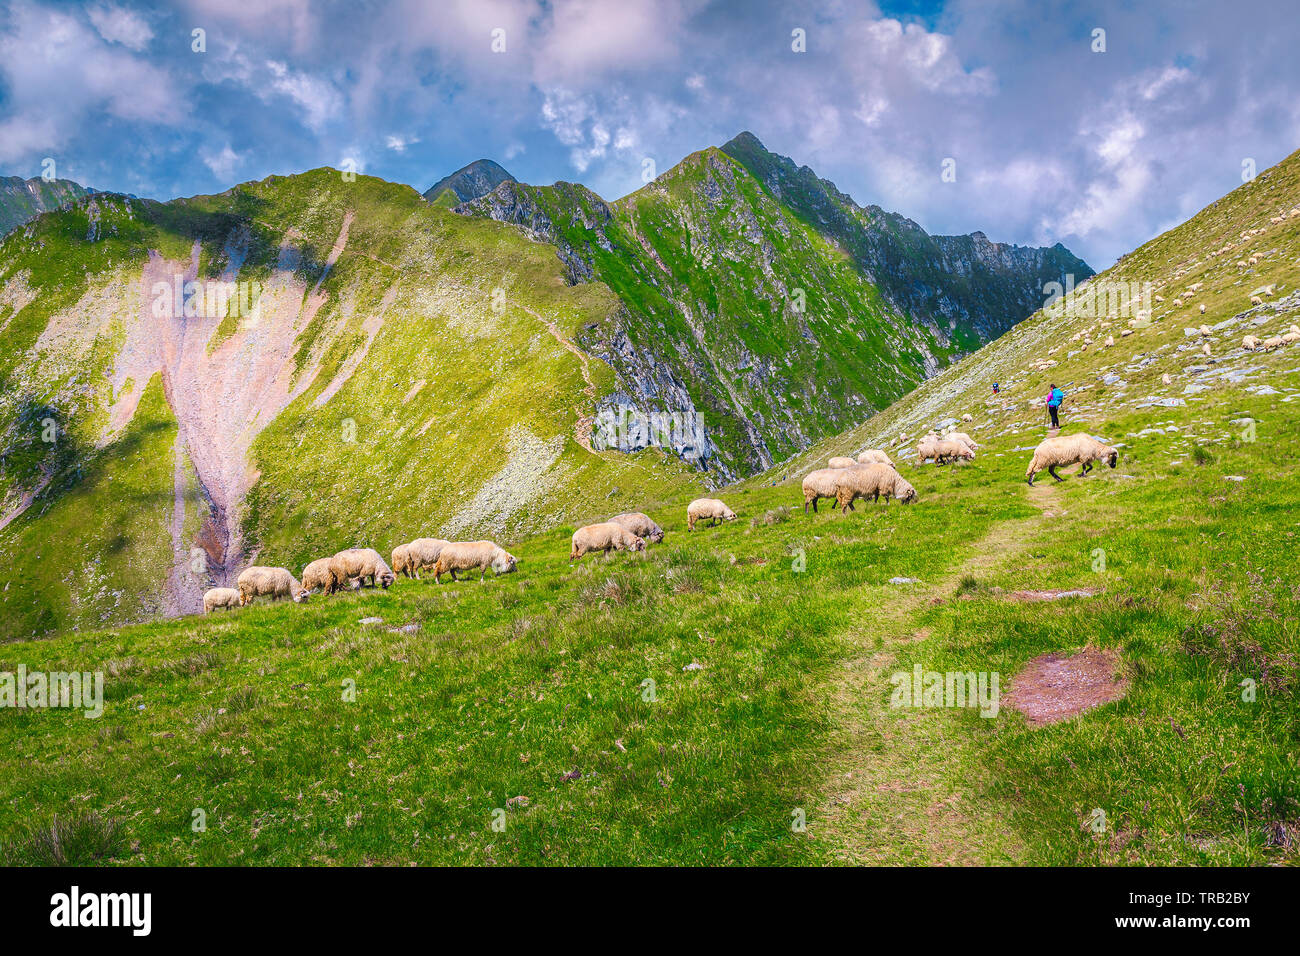 Herd of sheep on the steep slope and spectacular mountains in background, Carpathians, Romania, Europe Stock Photo